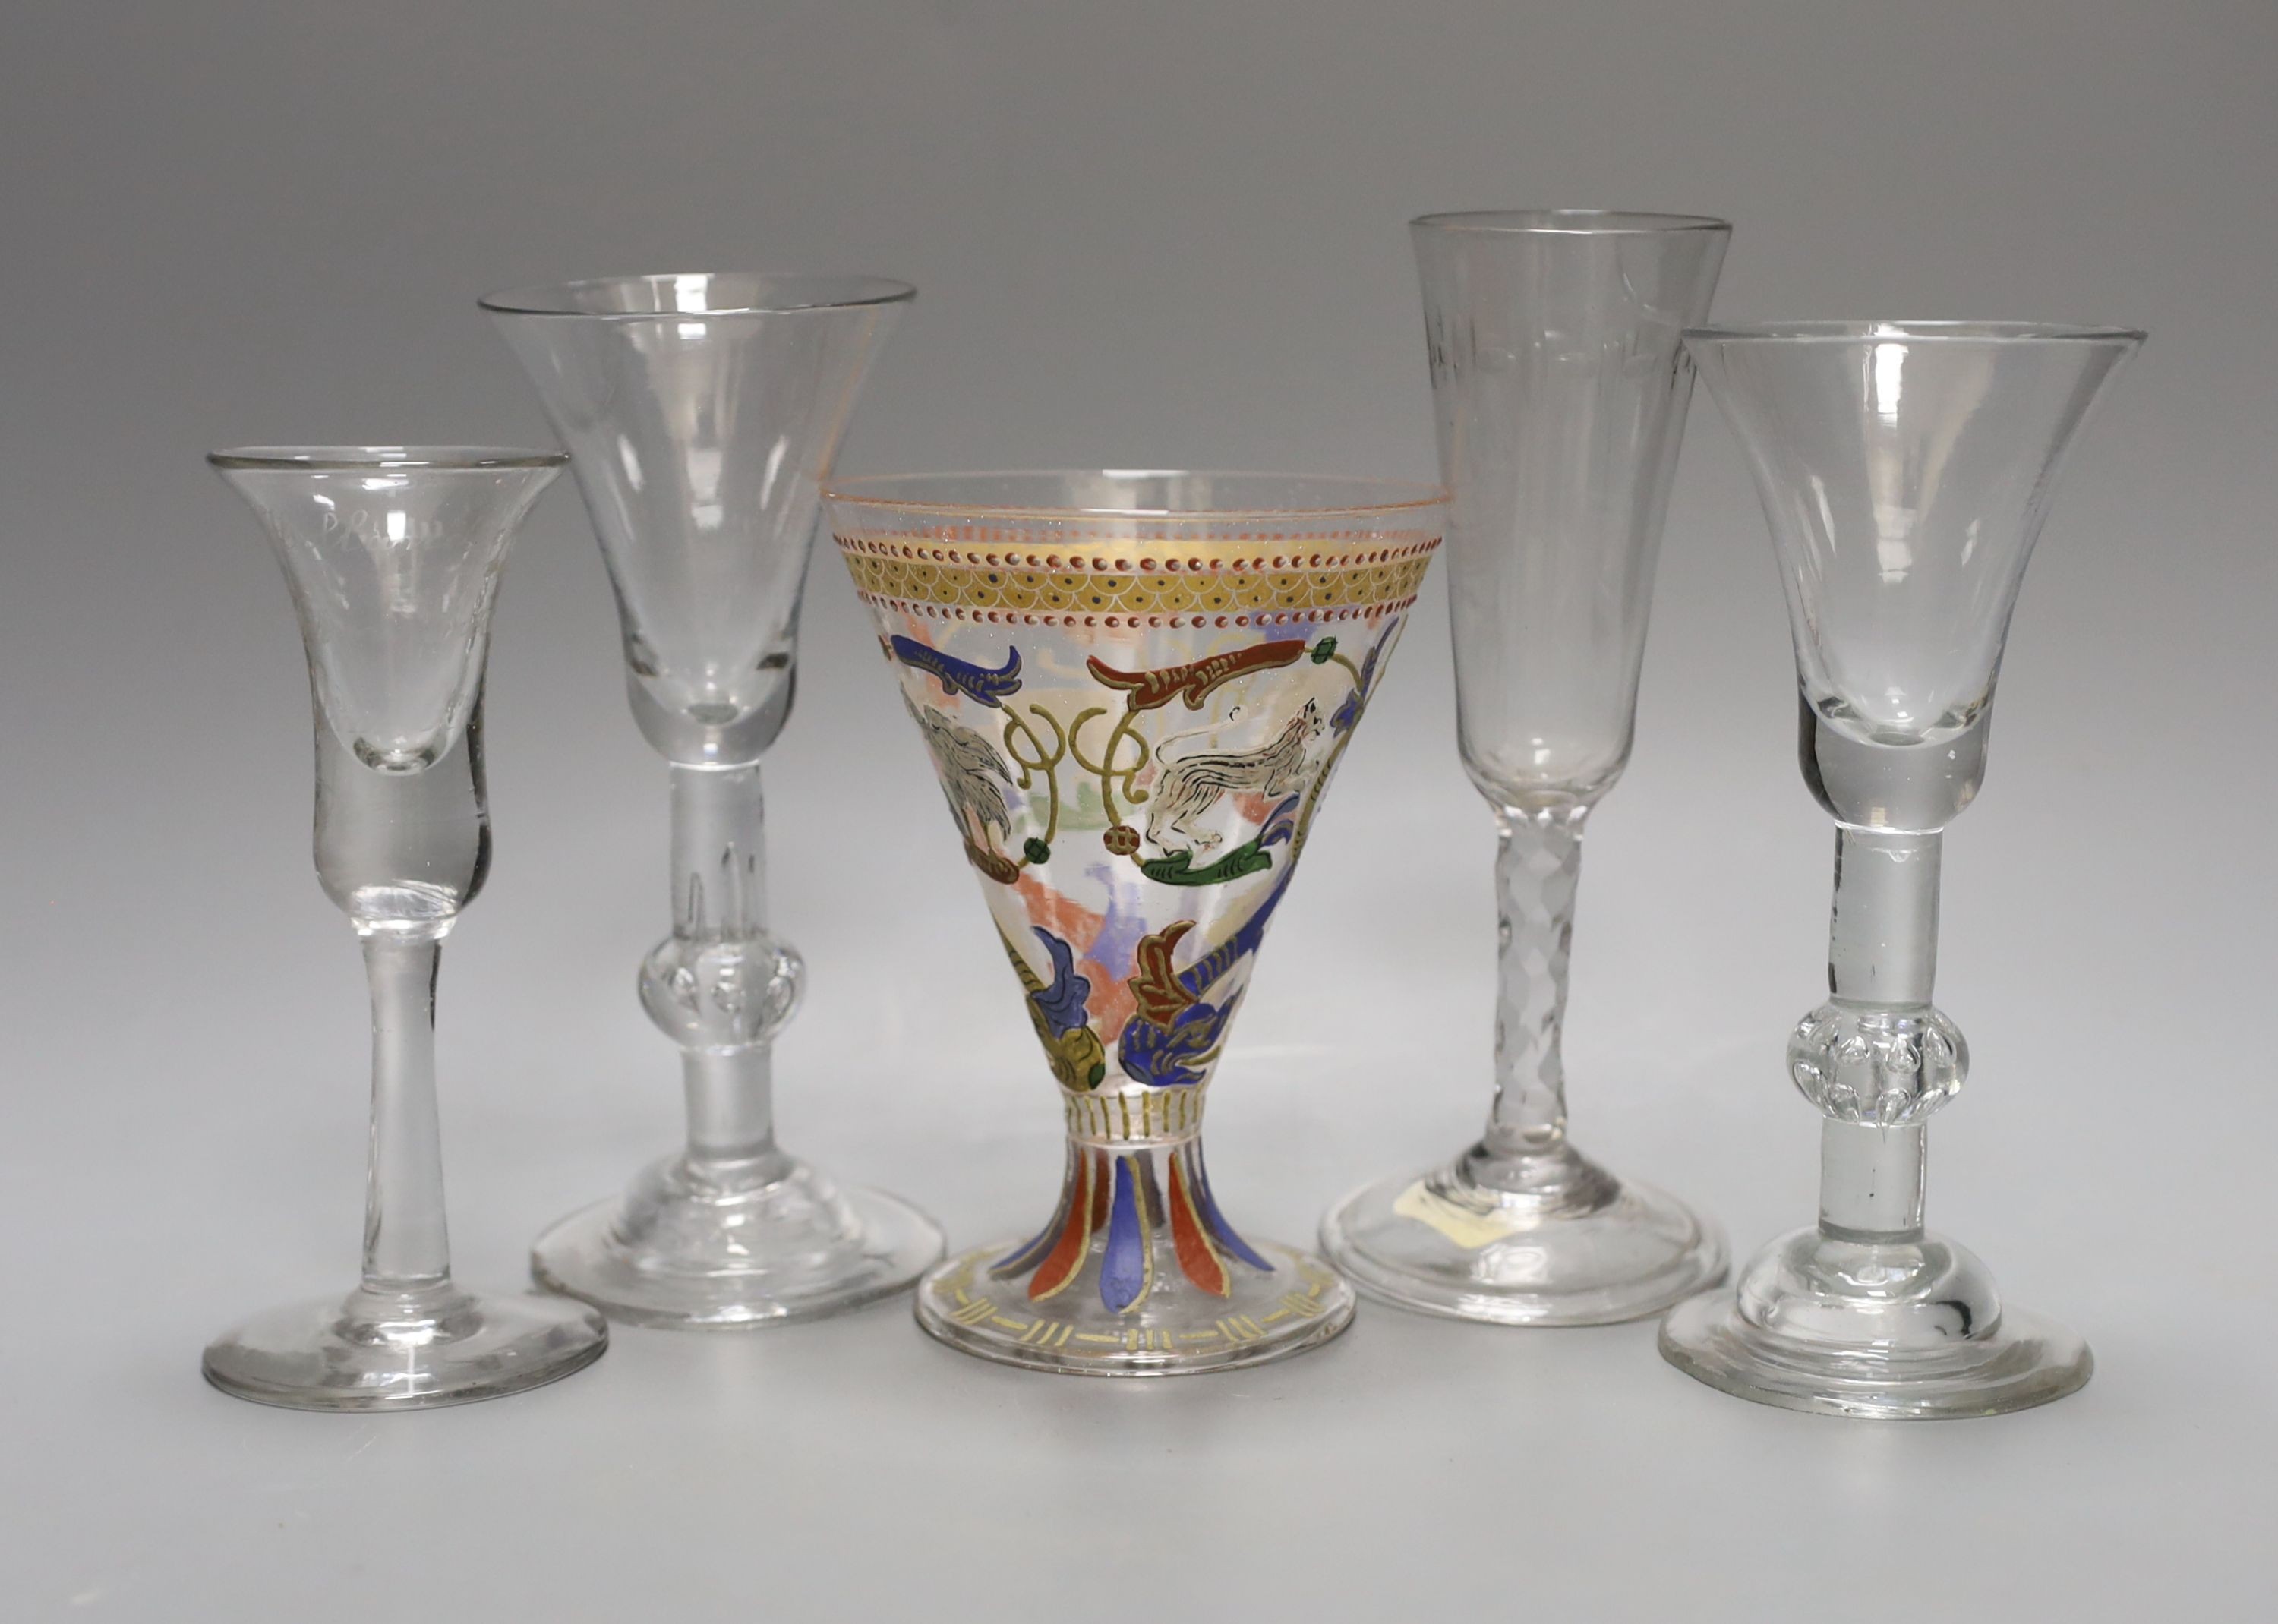 Four 18th century drinking glasses and a Bohemian Historismus enamelled wine glass (5) tallest 18cm - Image 2 of 2